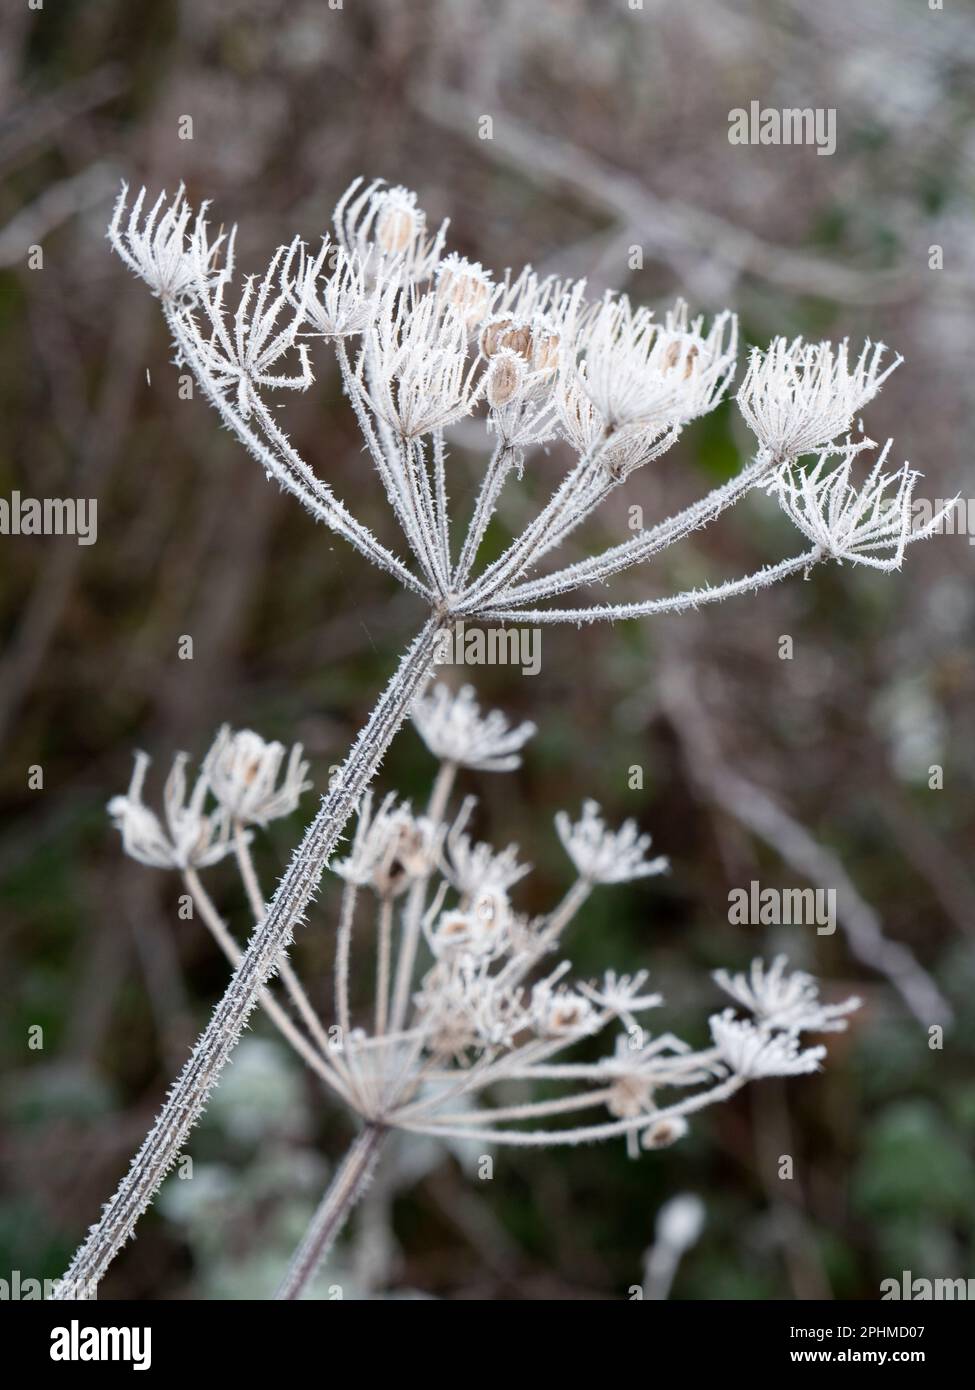 Anthriscus sylvestris, known as cow parsley is a herbaceous biennial or short-lived perennial plant in the family Apiaceae. It's very common in meadow Stock Photo